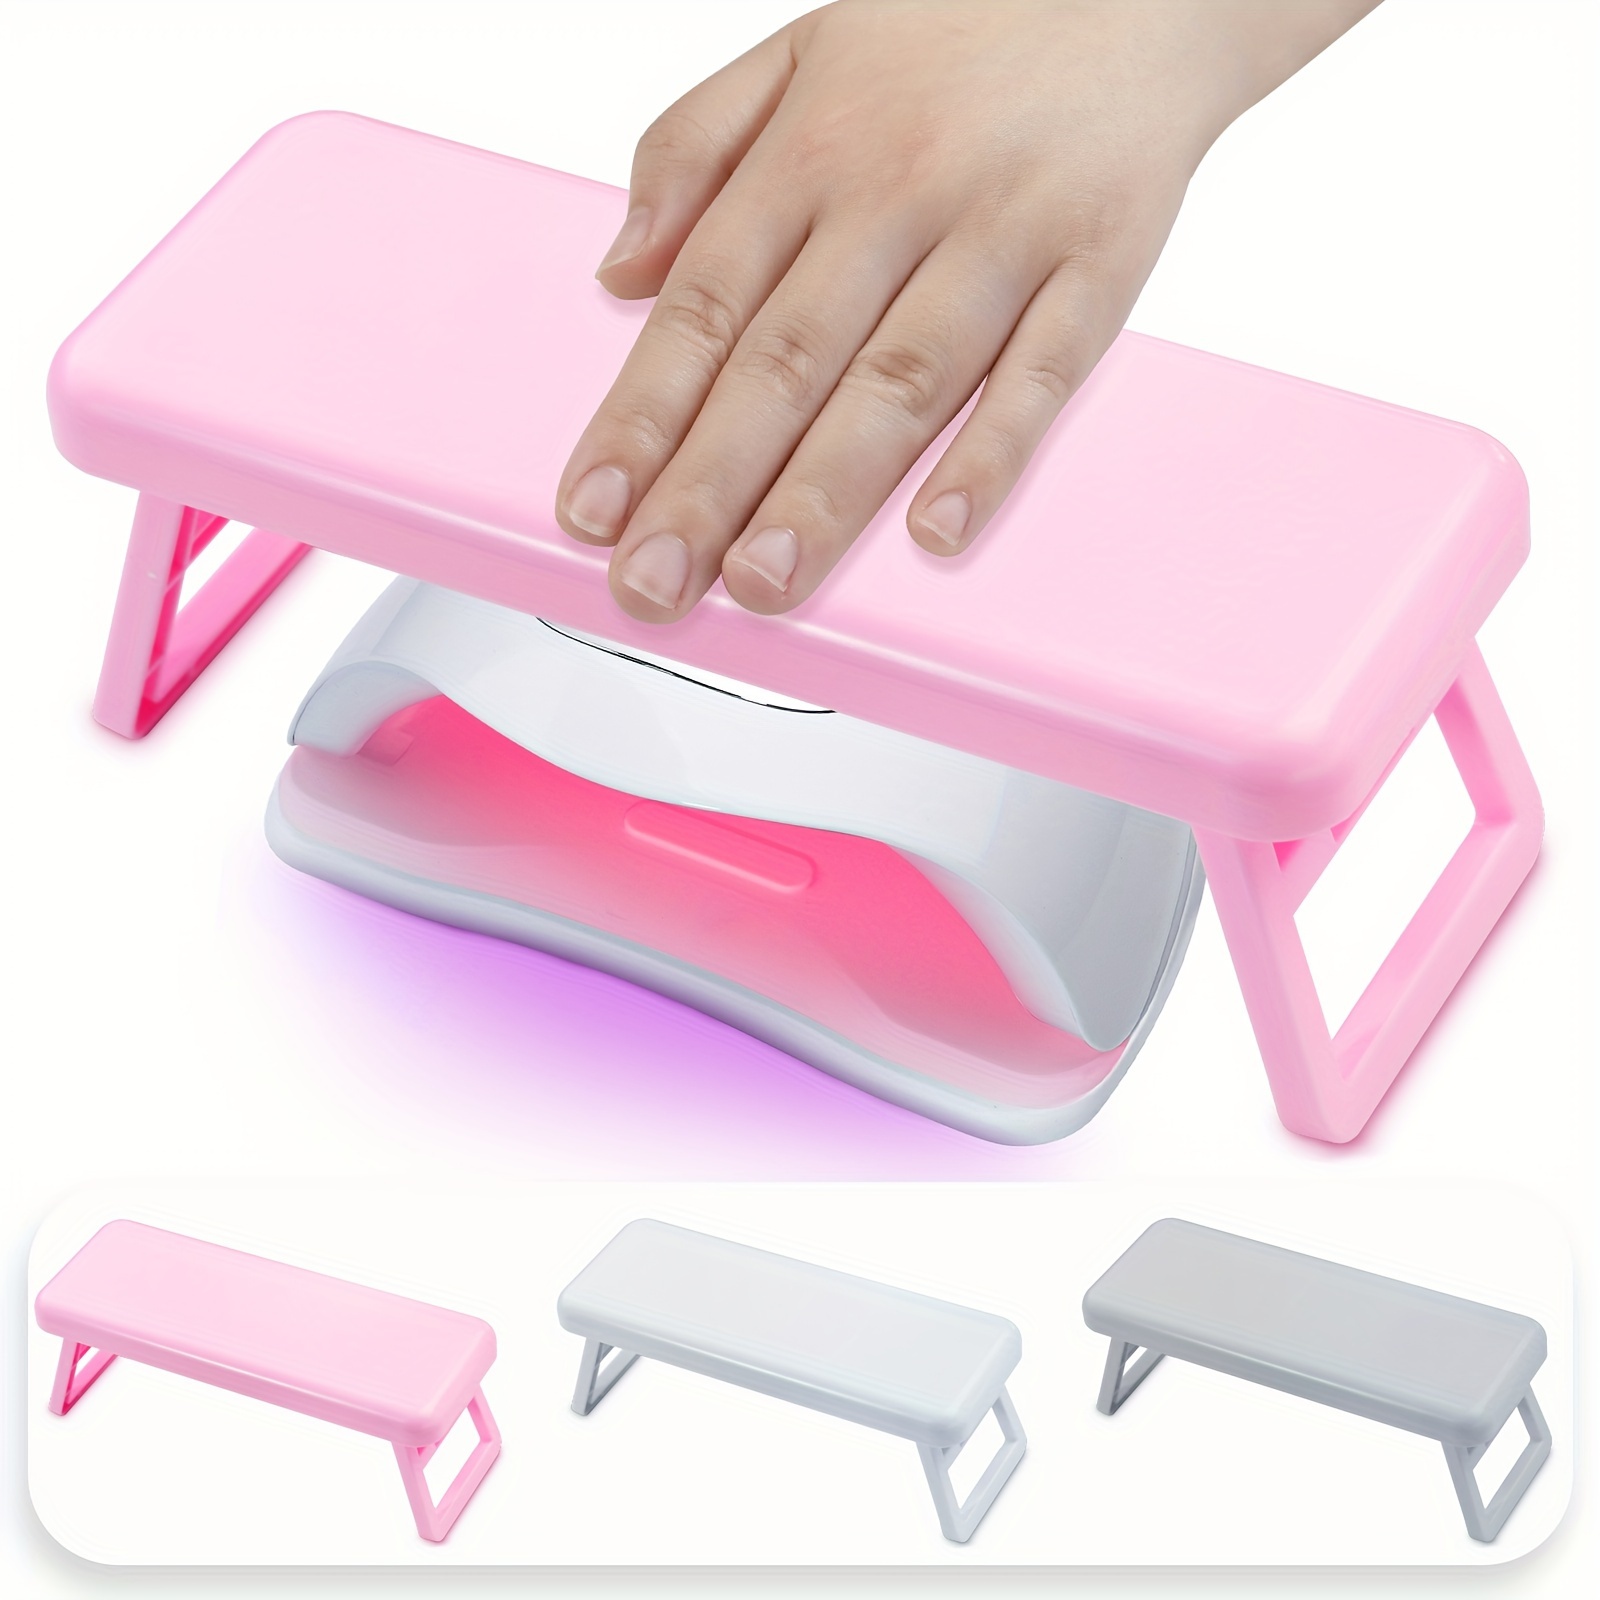 

Misscheering Foldable Hand Rest For Nail Art, Unscented Plastic Wrist Support Bracket With Silicone Anti-slip Pad For Salon Use